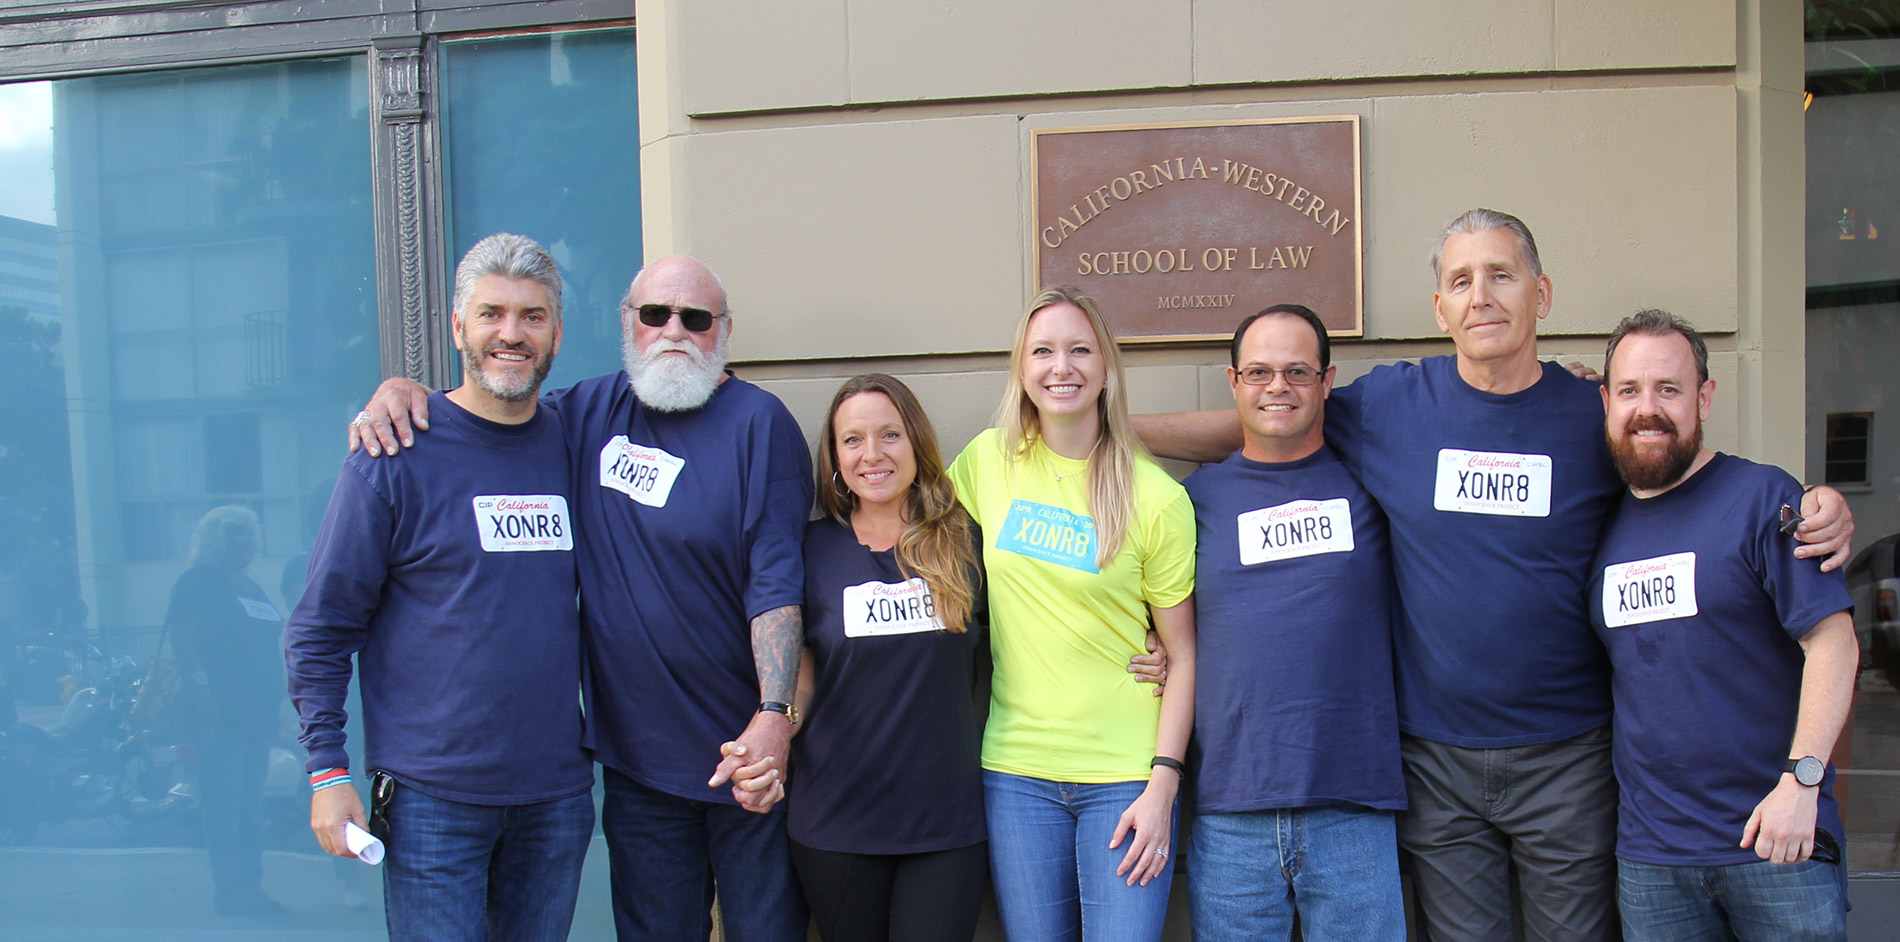 California Innocence Project with exonerees outside California Western